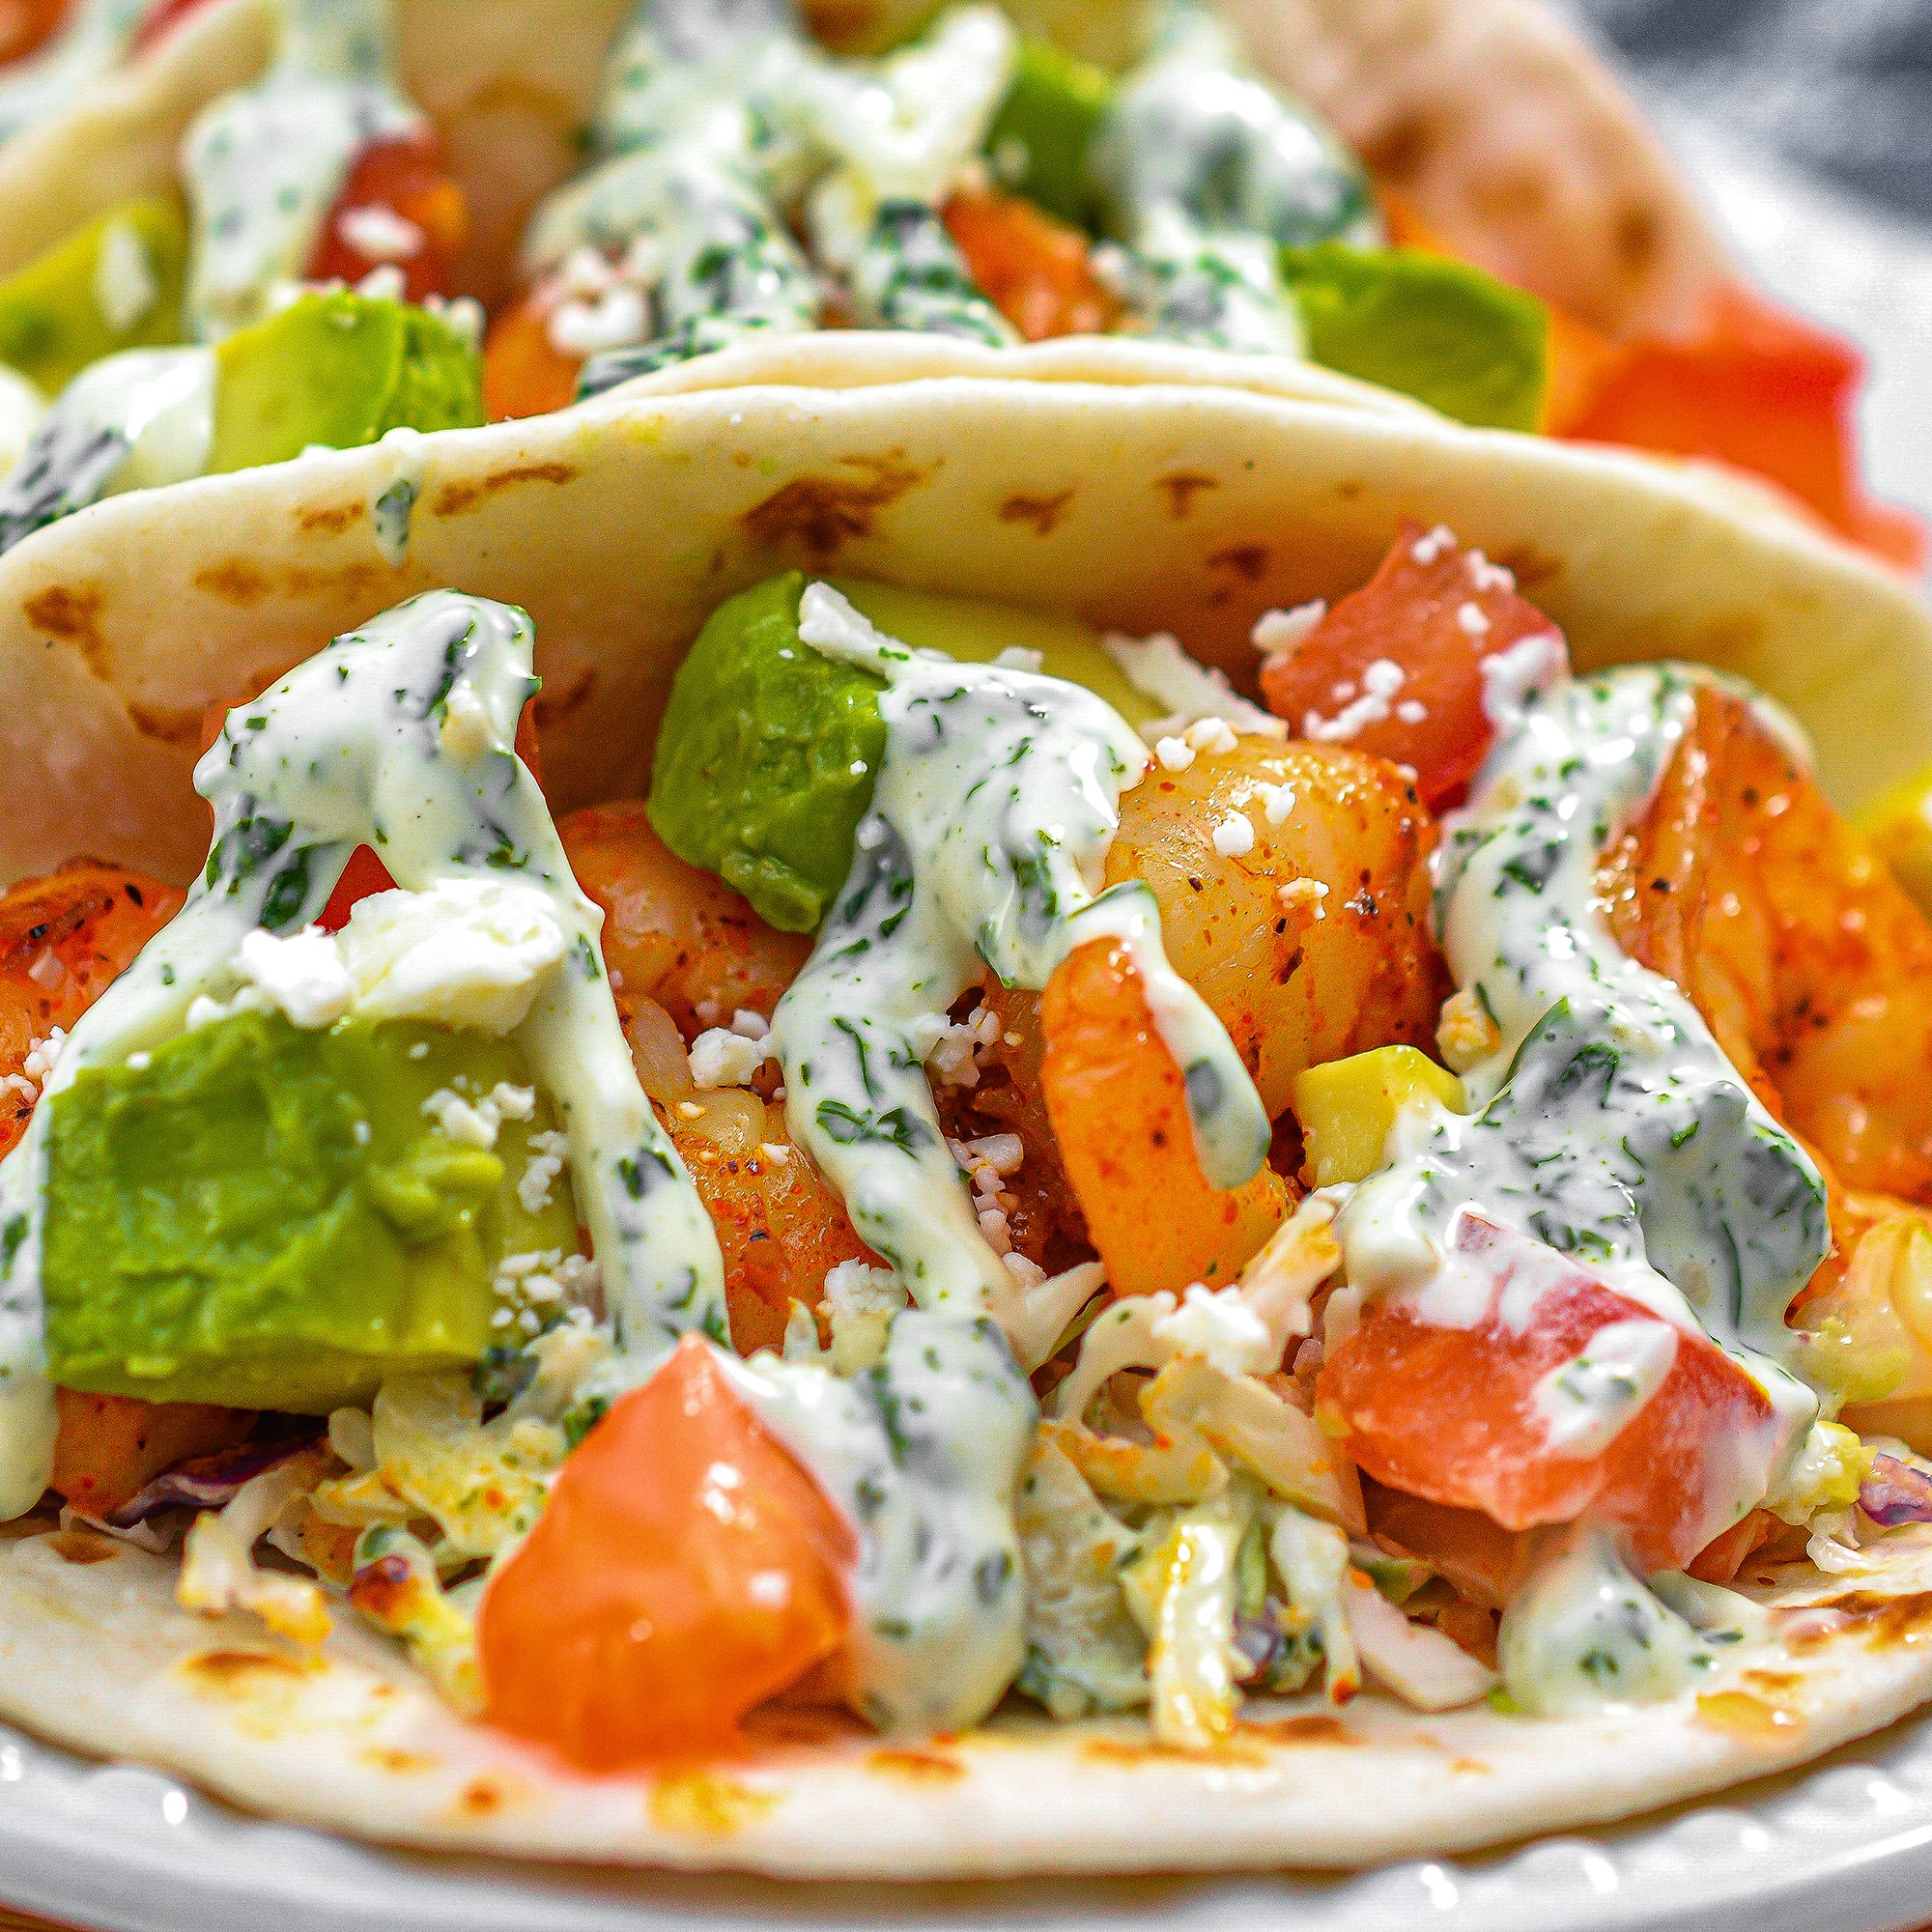 Place a layer of the coleslaw mixture in the bottom of the tortillas, top with shrimp and garnish with the tomatoes, feta cheese and avocado.